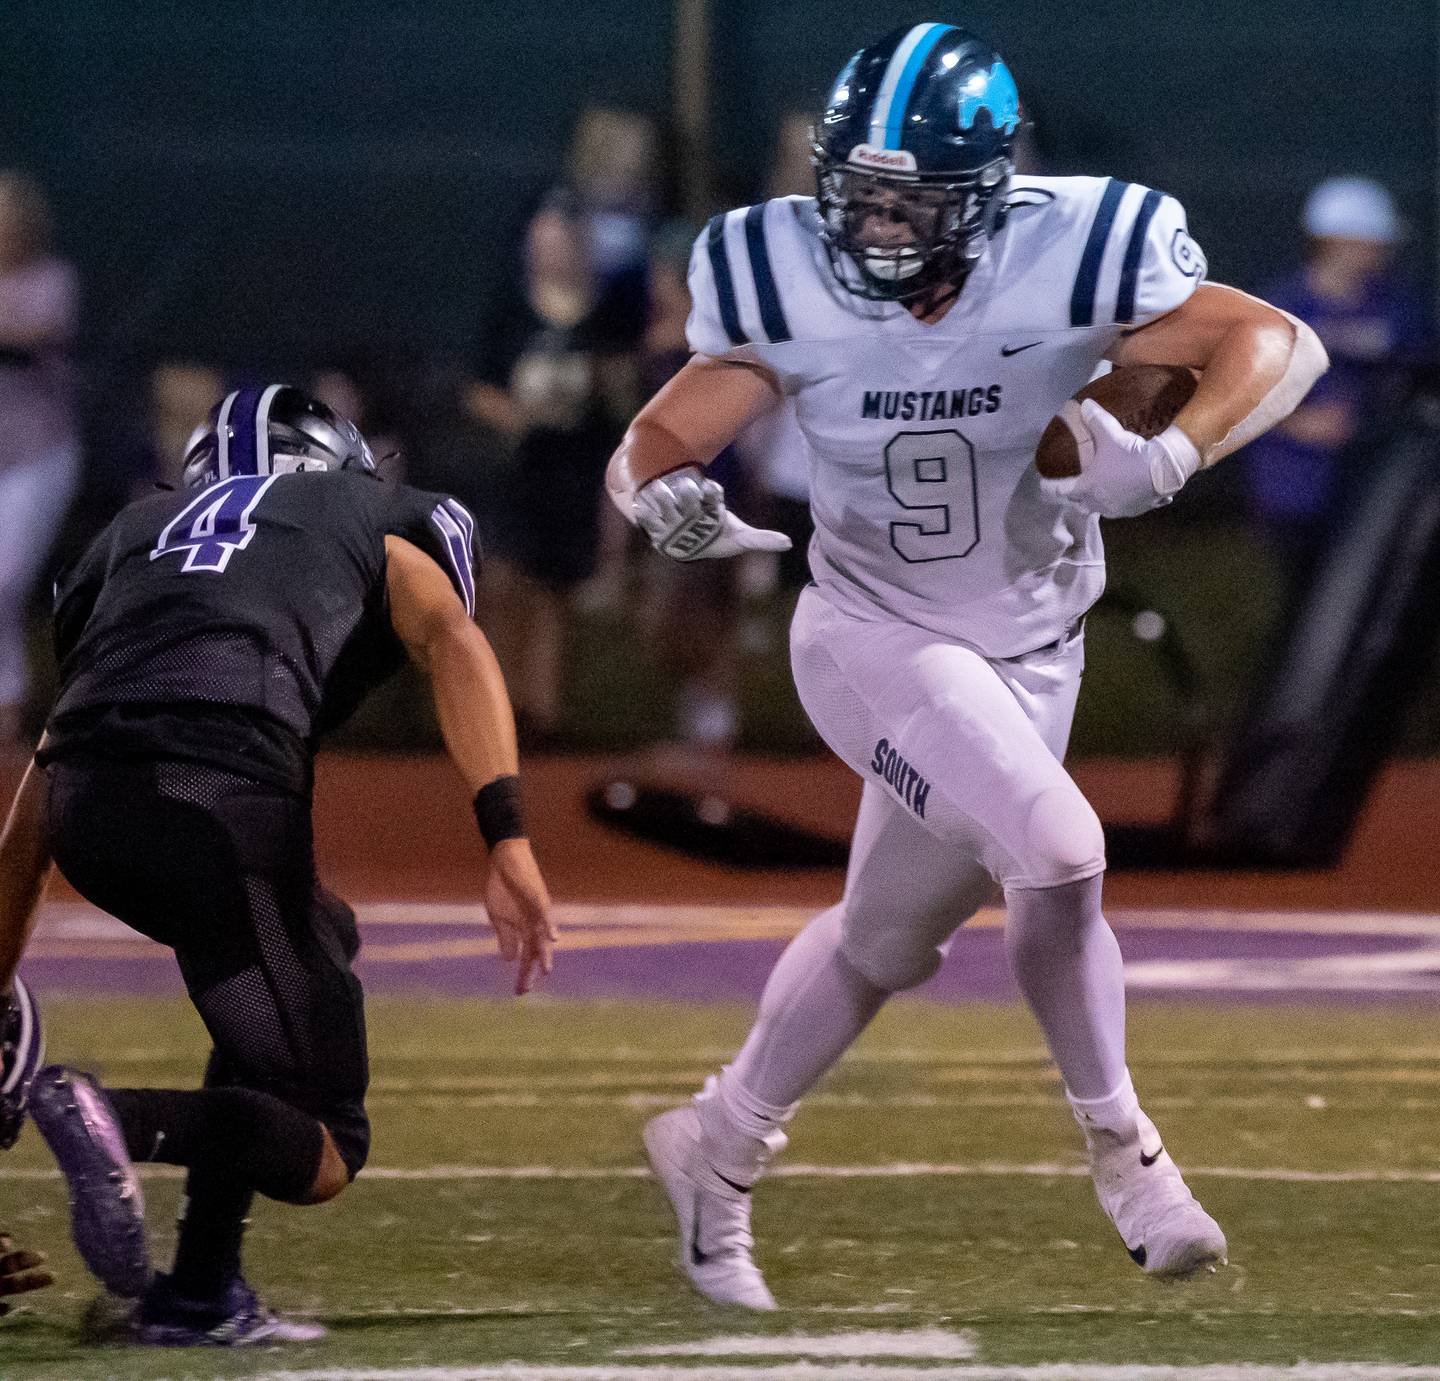 Downers Grove South's Mack O'Halloran (9) carries the ball against Downers Grove North during a football game at Downers Grove North High School on Friday, Sep 9, 2022.